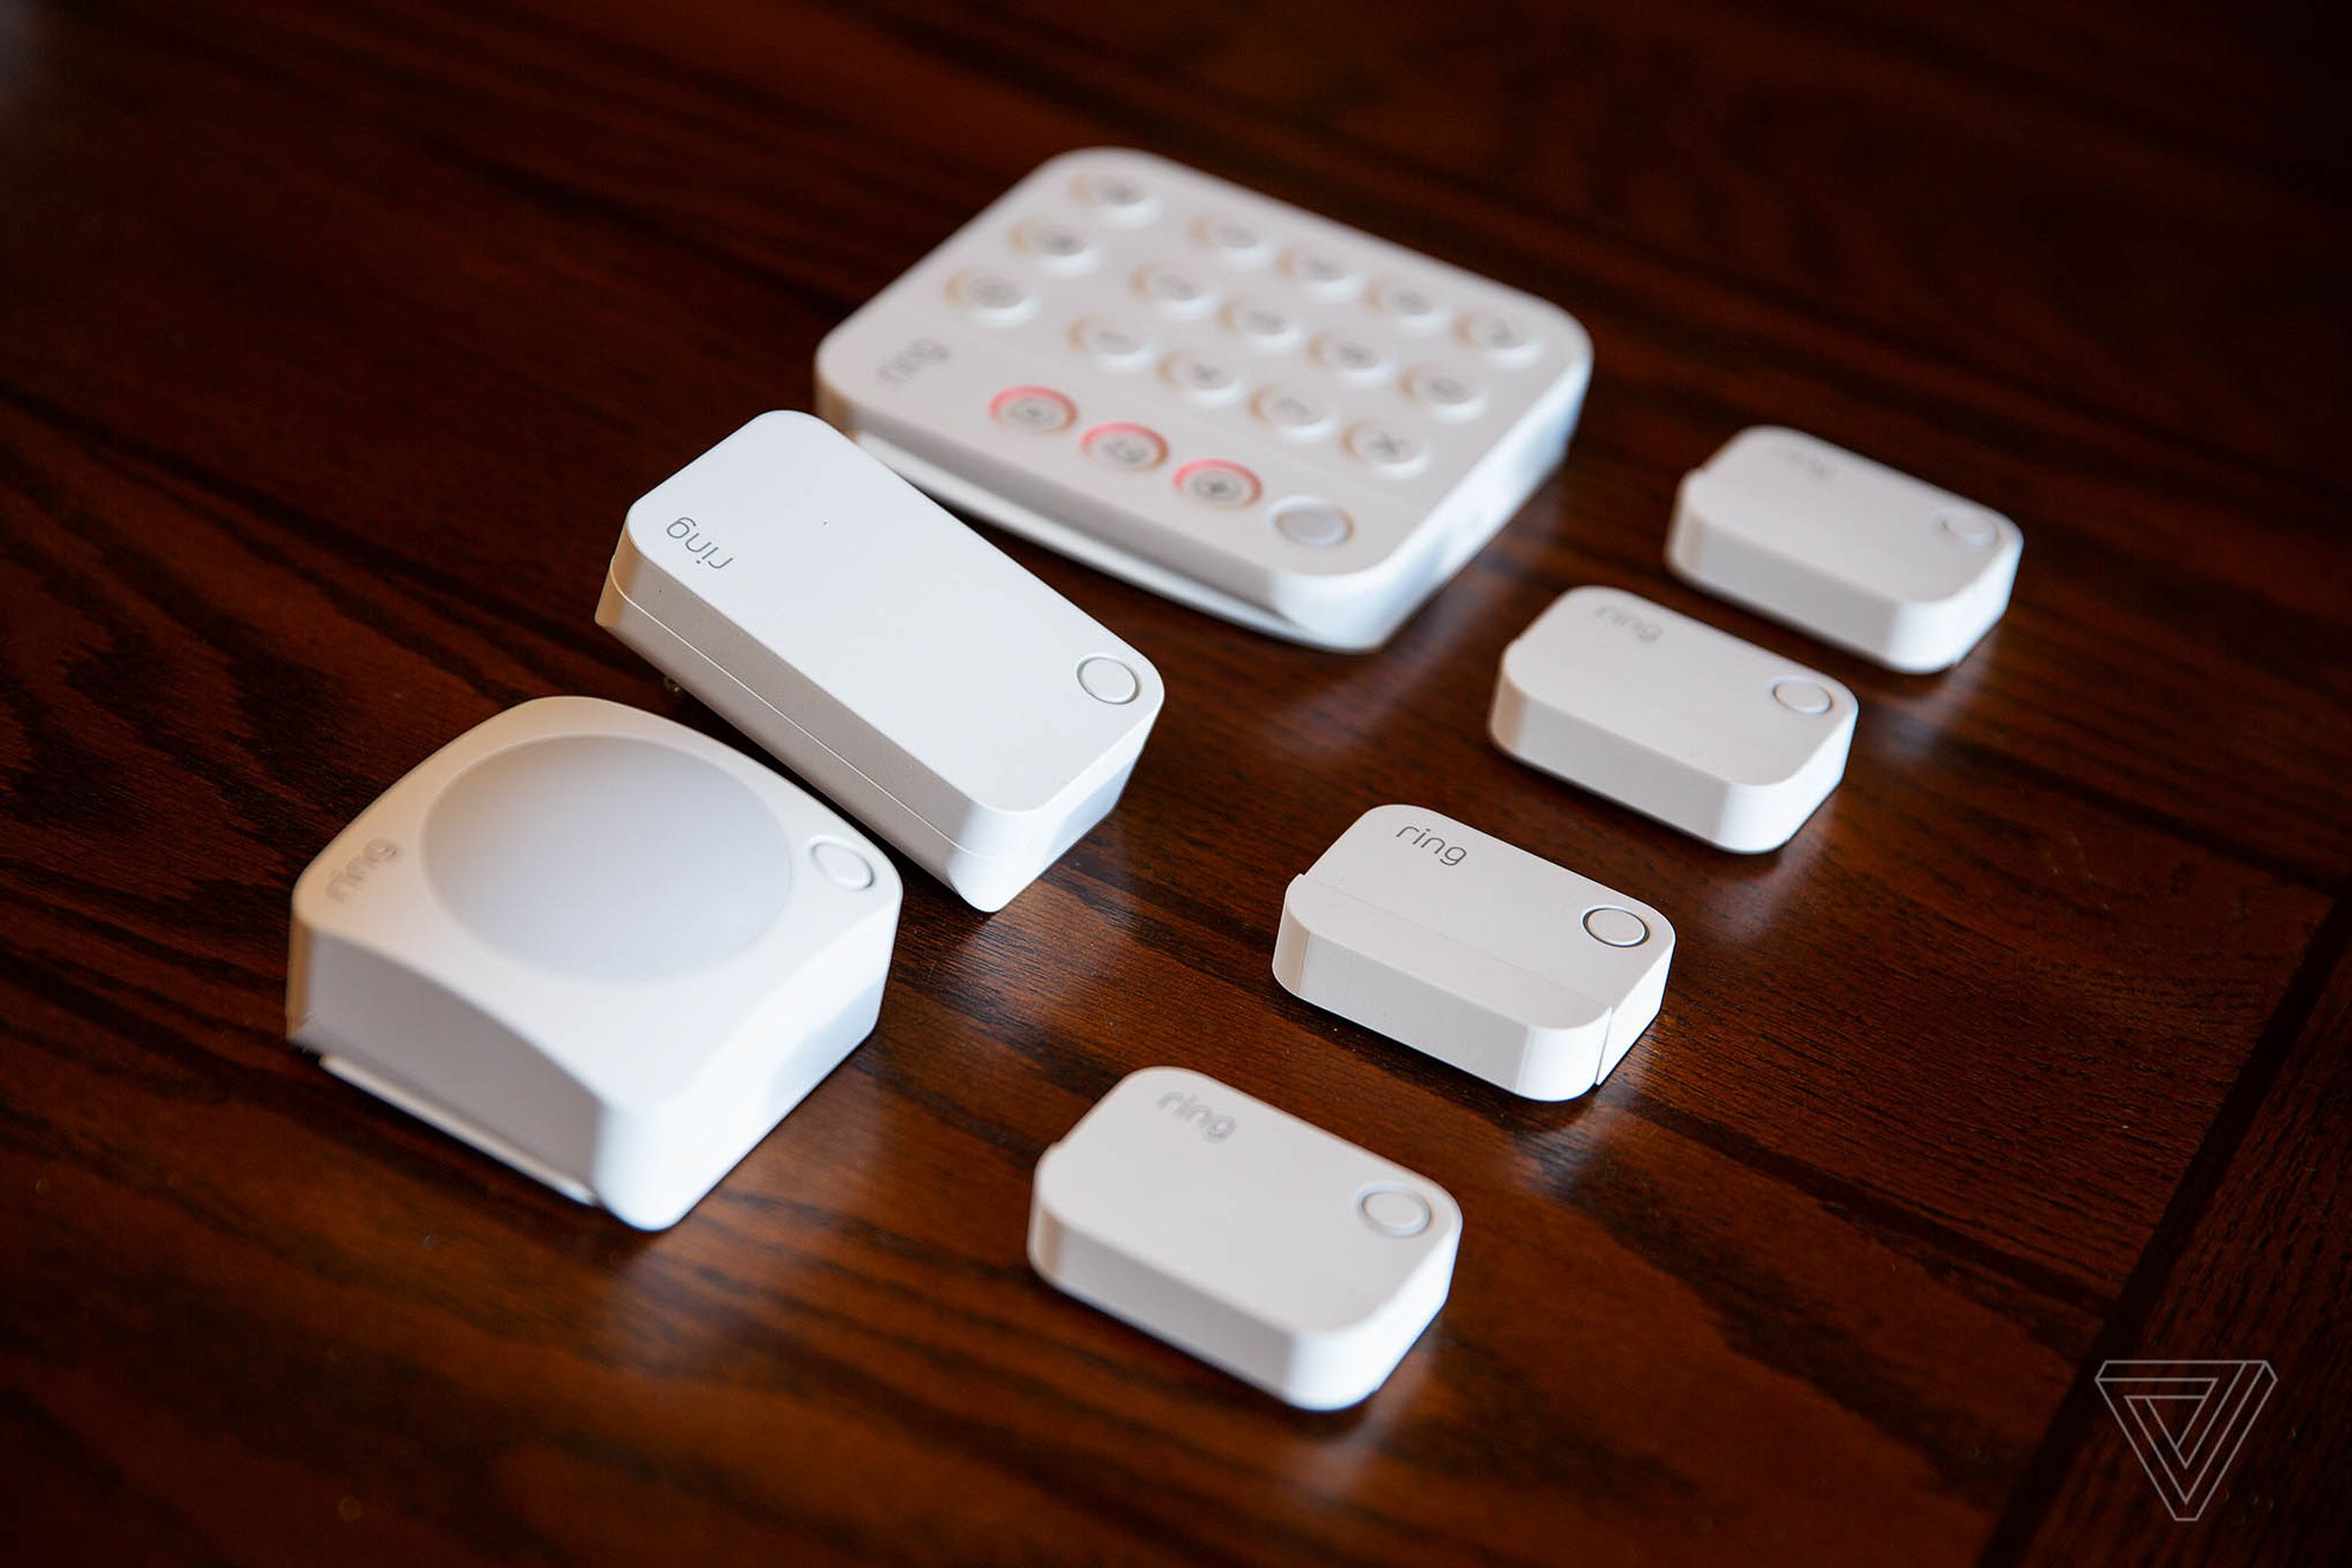 The Ring Alarm Pro set comes with four contact sensors, a motion sensor, a Z-Wave range extender, a keypad, and more.